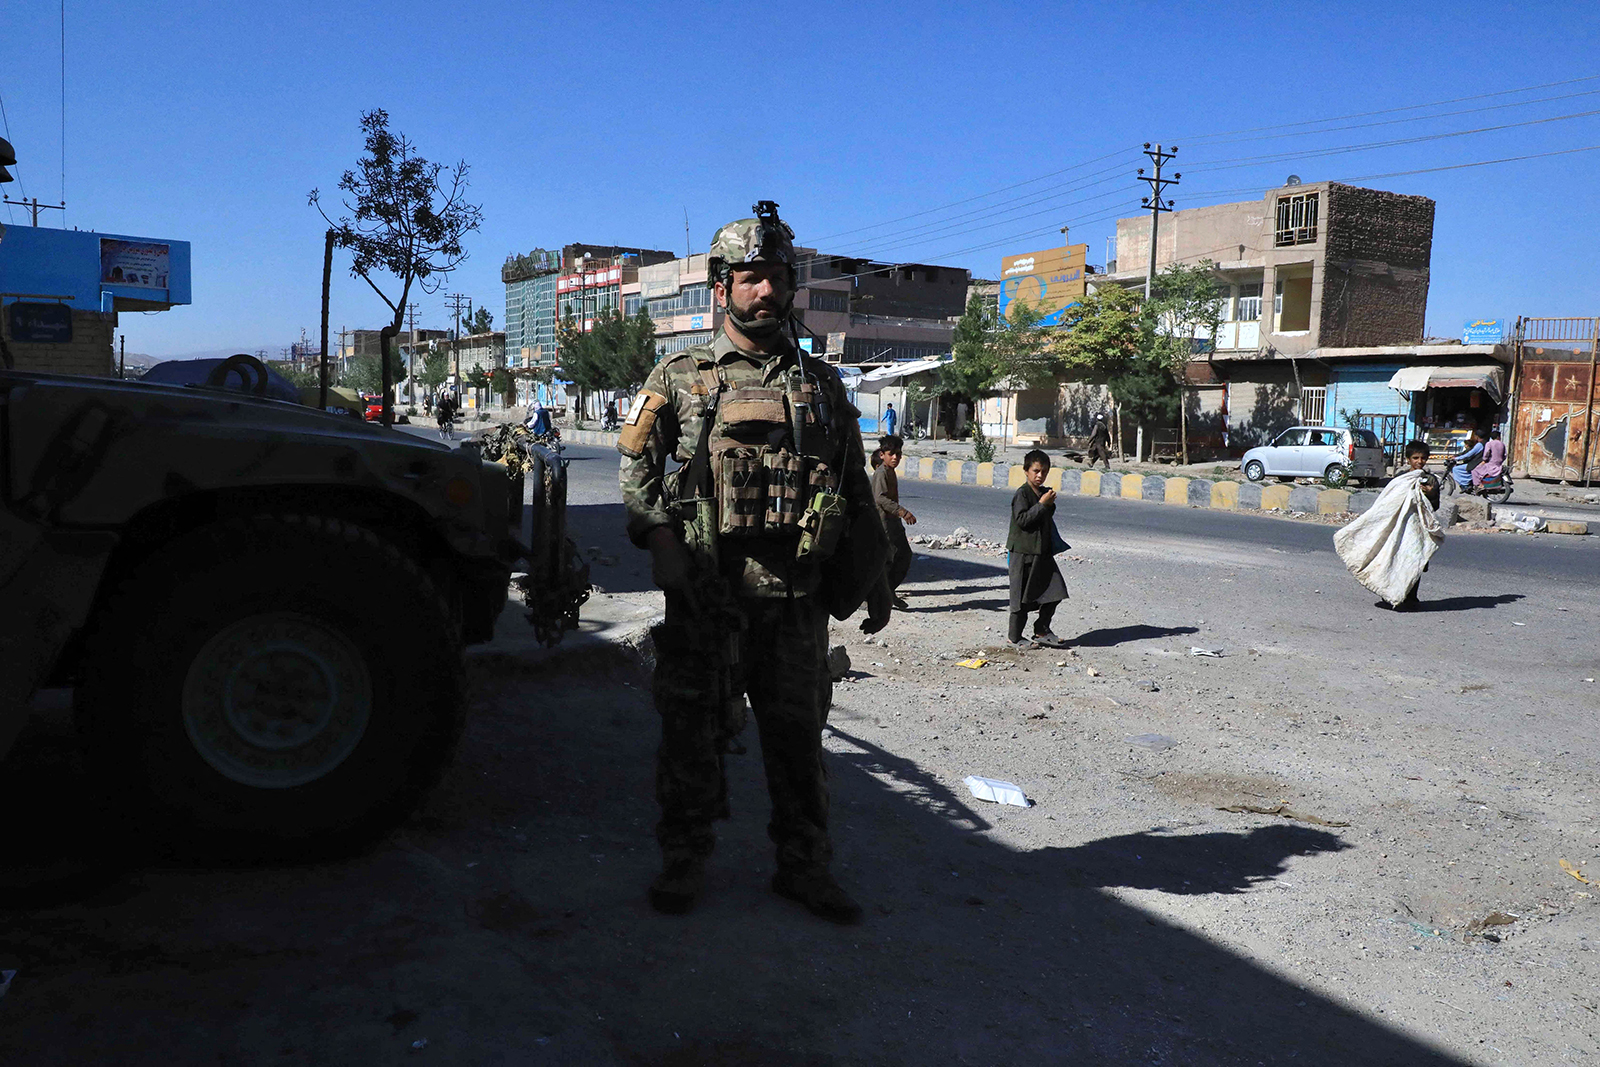  An Afghan security force personnel stands guard along the roadside in Herat on Thursday, as Taliban took over the police headquarters in Herat.